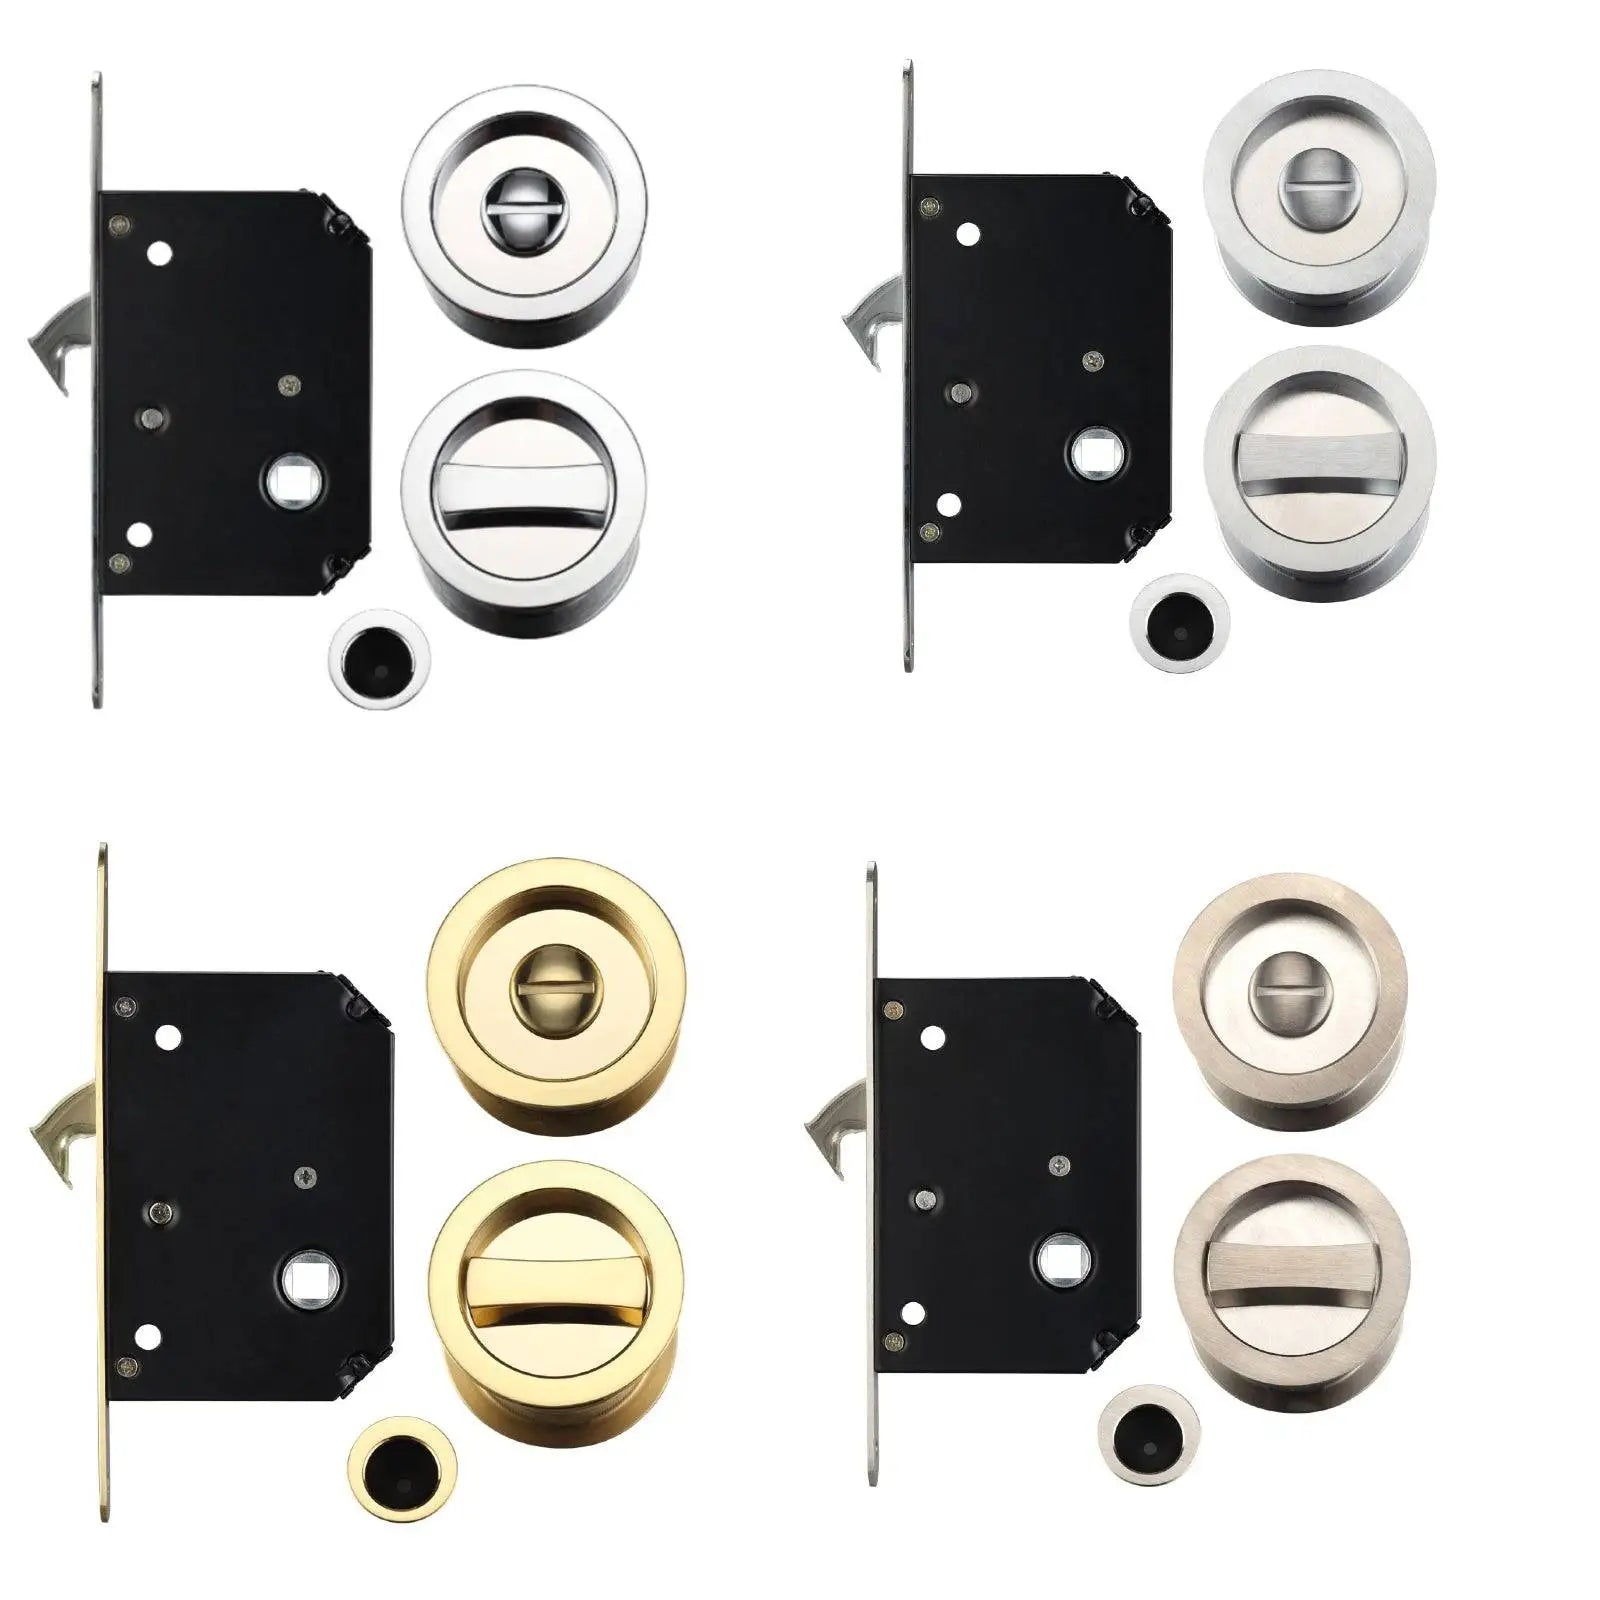 Sliding Door Privacy Lock Set For 35-45mm Thick Doors - Decor And Decor